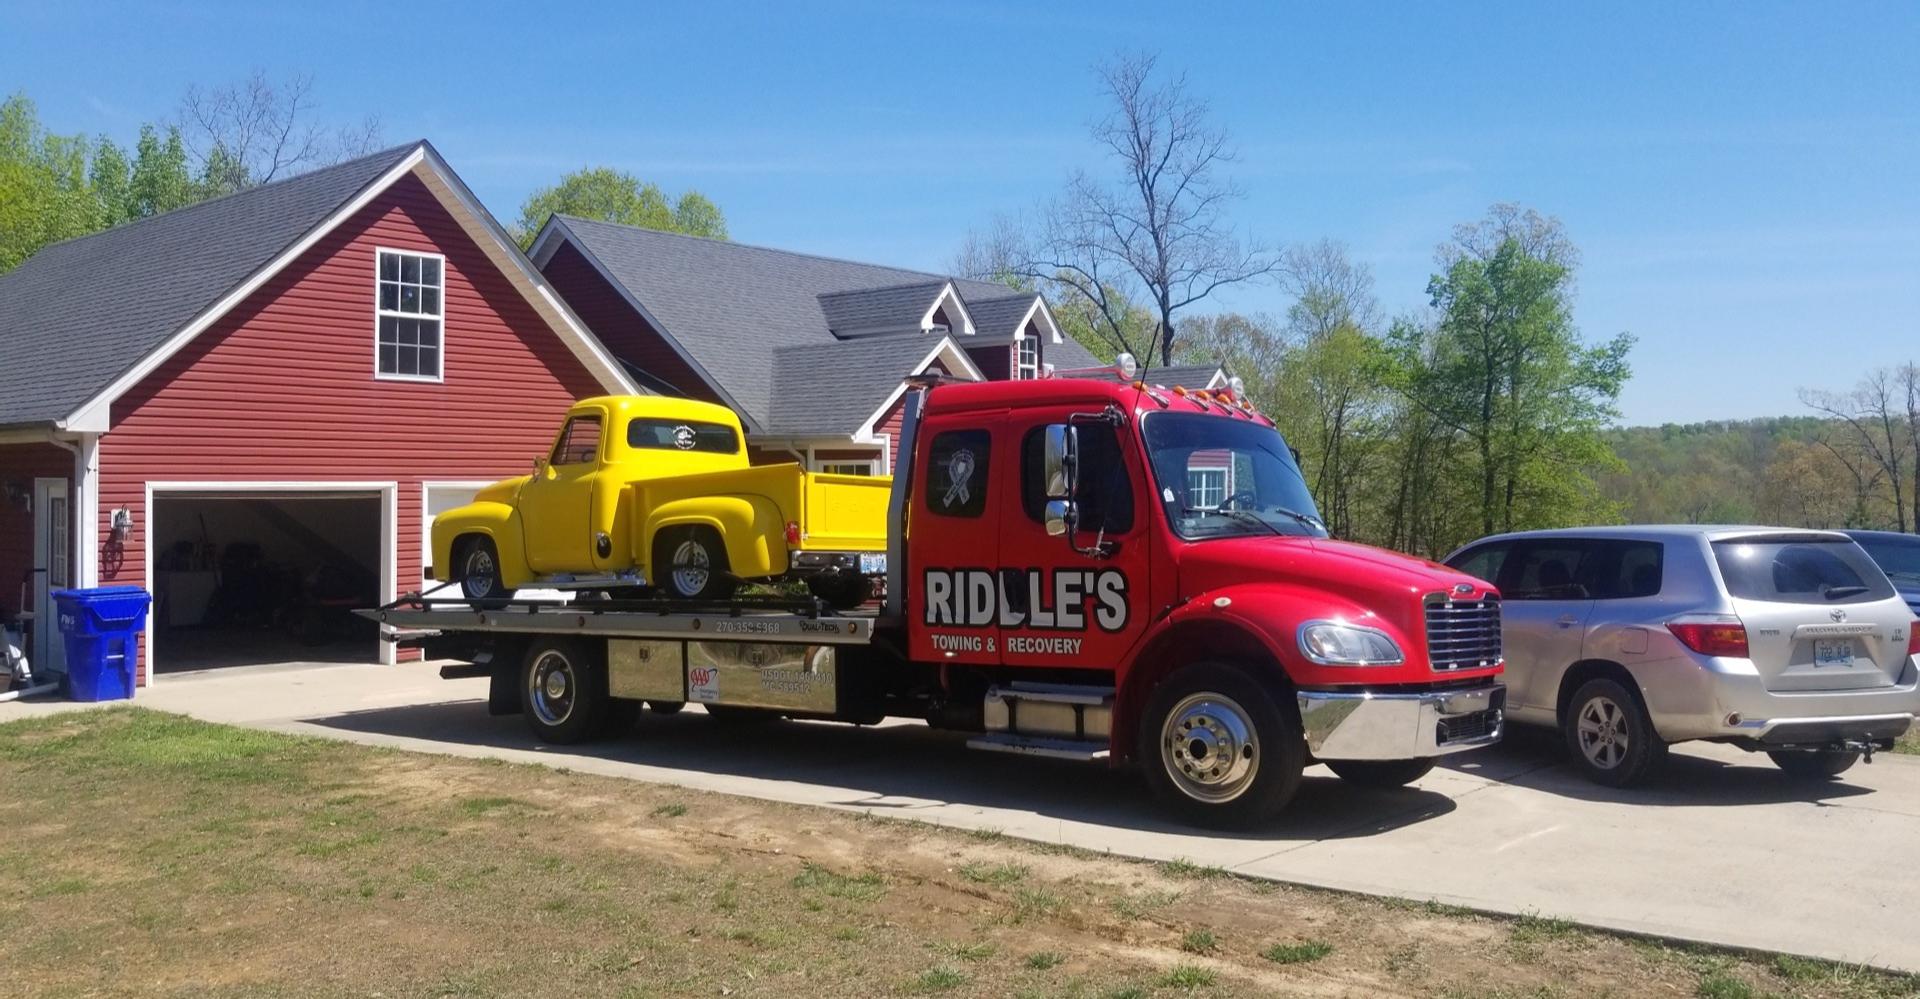 Our experts aren’t just highly trained, licensed and certified to perform quick, damage-free work—they’re also good, kind people who want to deliver the comfort and peace of mind you deserve when car trouble strikes. All Technicians are drug and alcohol tested, uniformed, and checked for criminal backgrounds.  Call Riddle’s today for the quality towing services you deserve!  We want you and your family safe and when we get the call, we make every attempt to provide that security